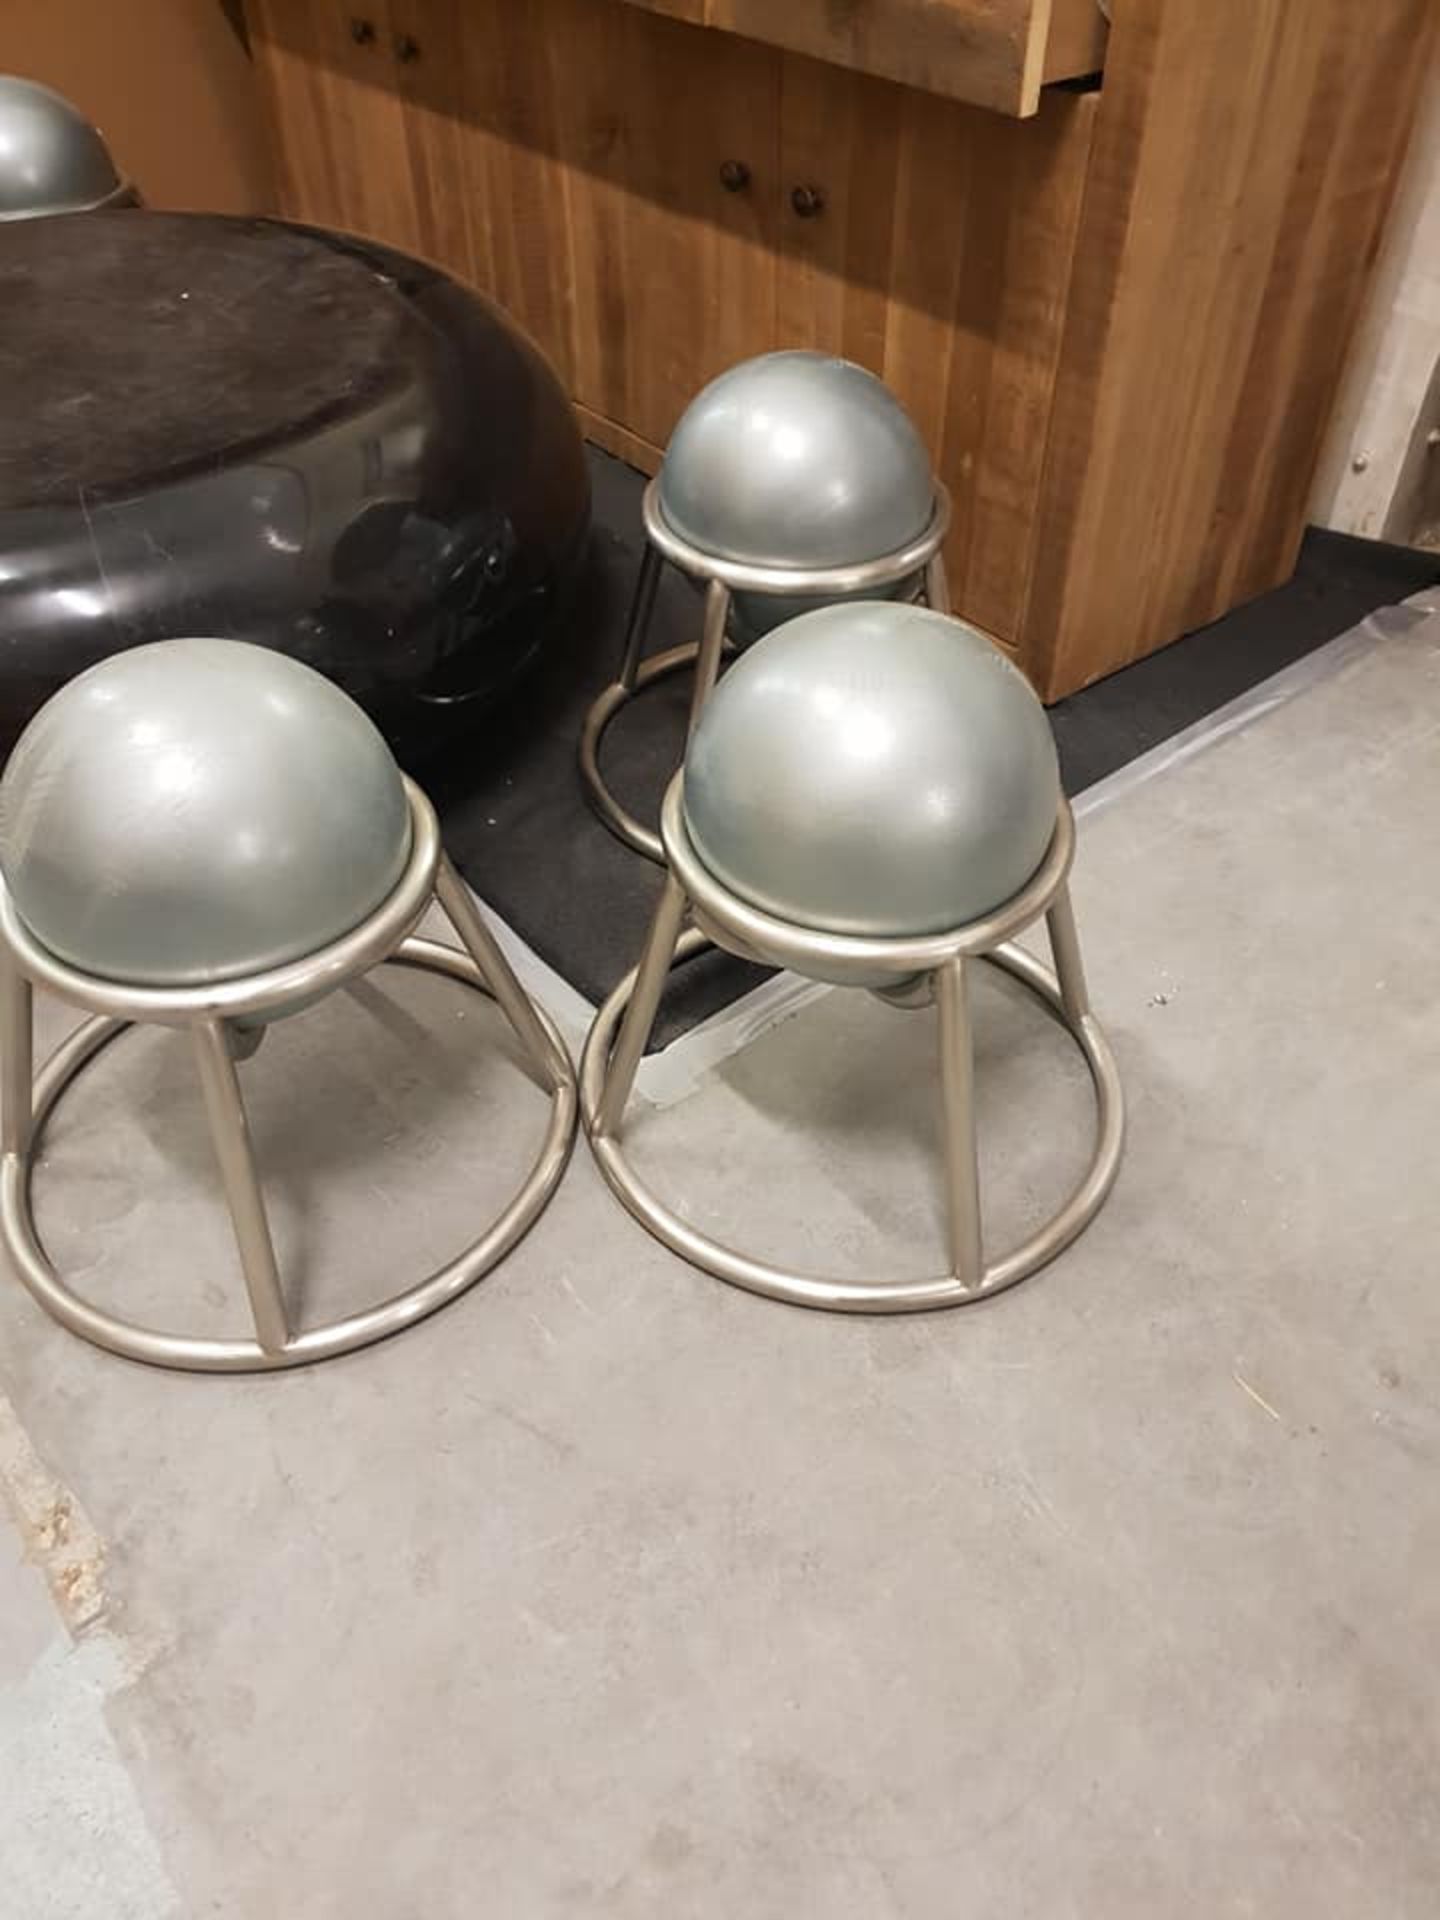 3 x Barball Low Stools 54cm The Overall Look Is One Of The Sports Clubs Of Yore, And With The